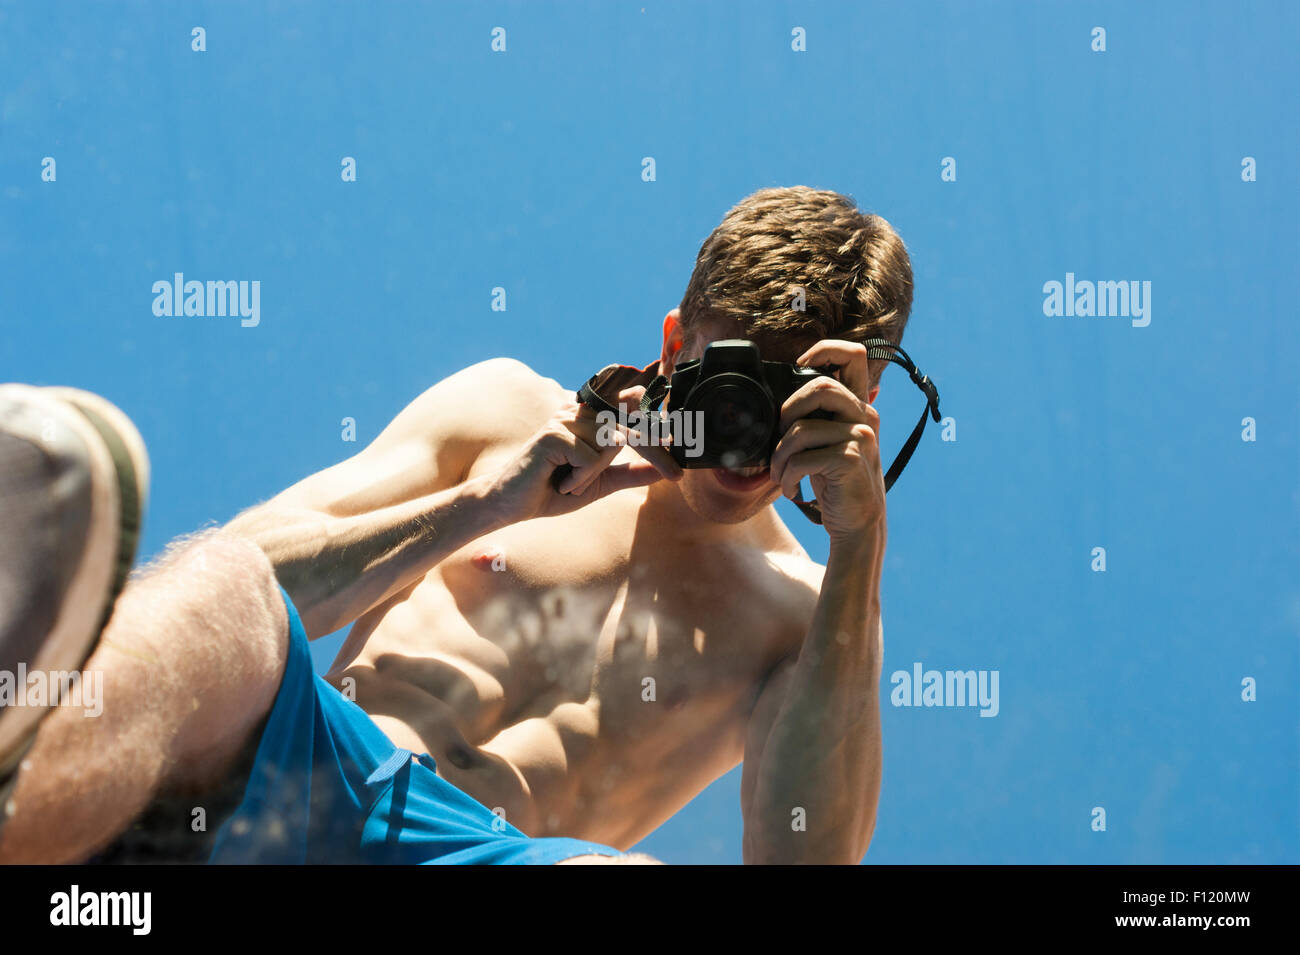 Lean but muscular man with his top off taking pictures of himself in a mirror.  Abstract shots.  The mirror is laying on grass. Stock Photo